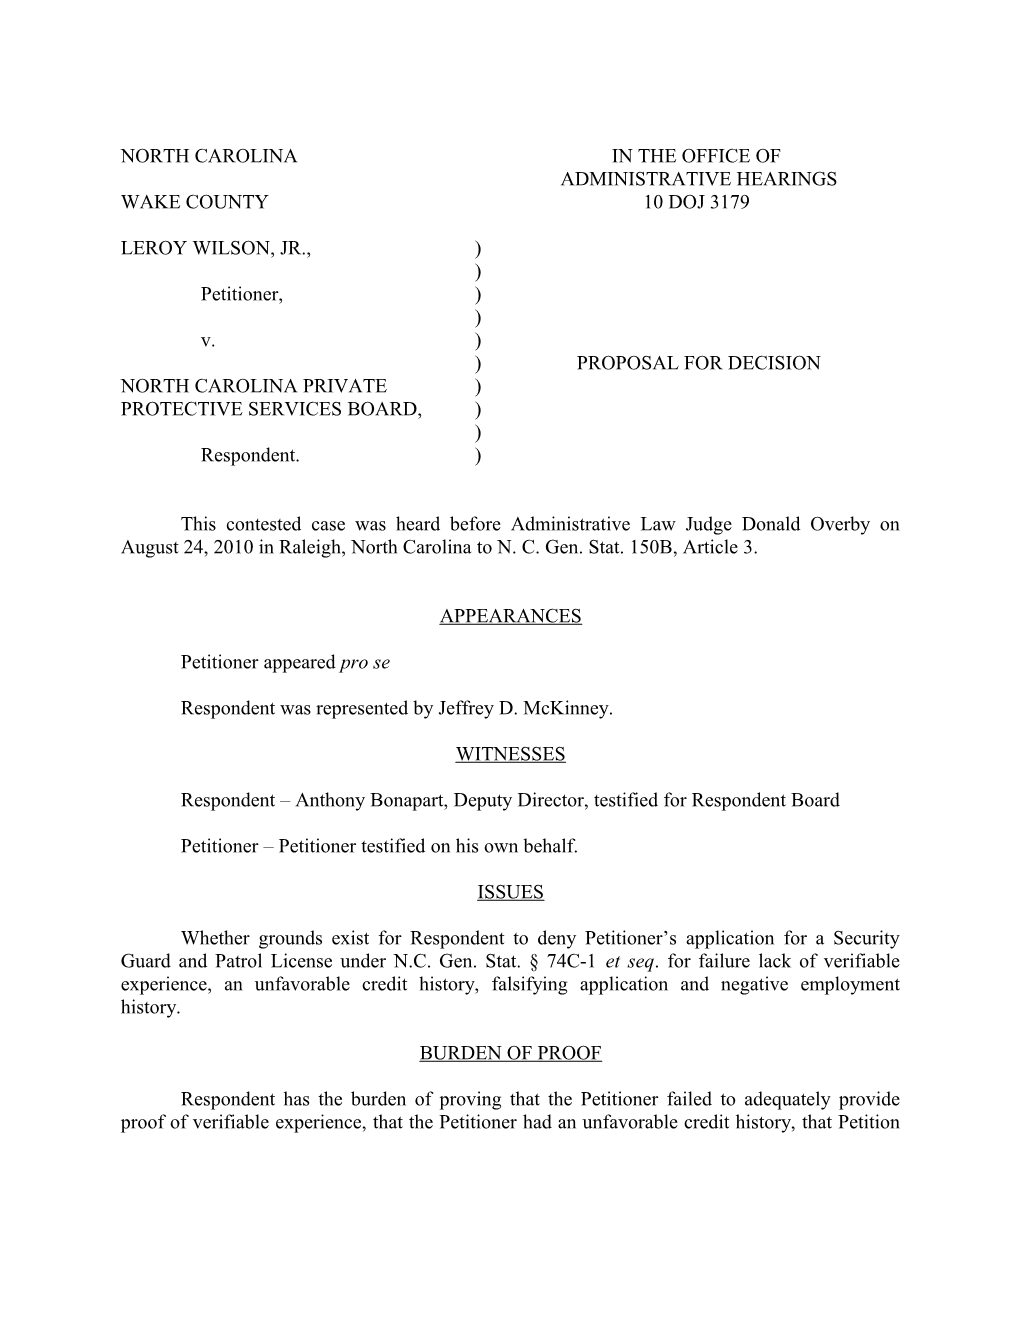 NCPPSB/Wilson/Security License/Proposed Order (00305860)